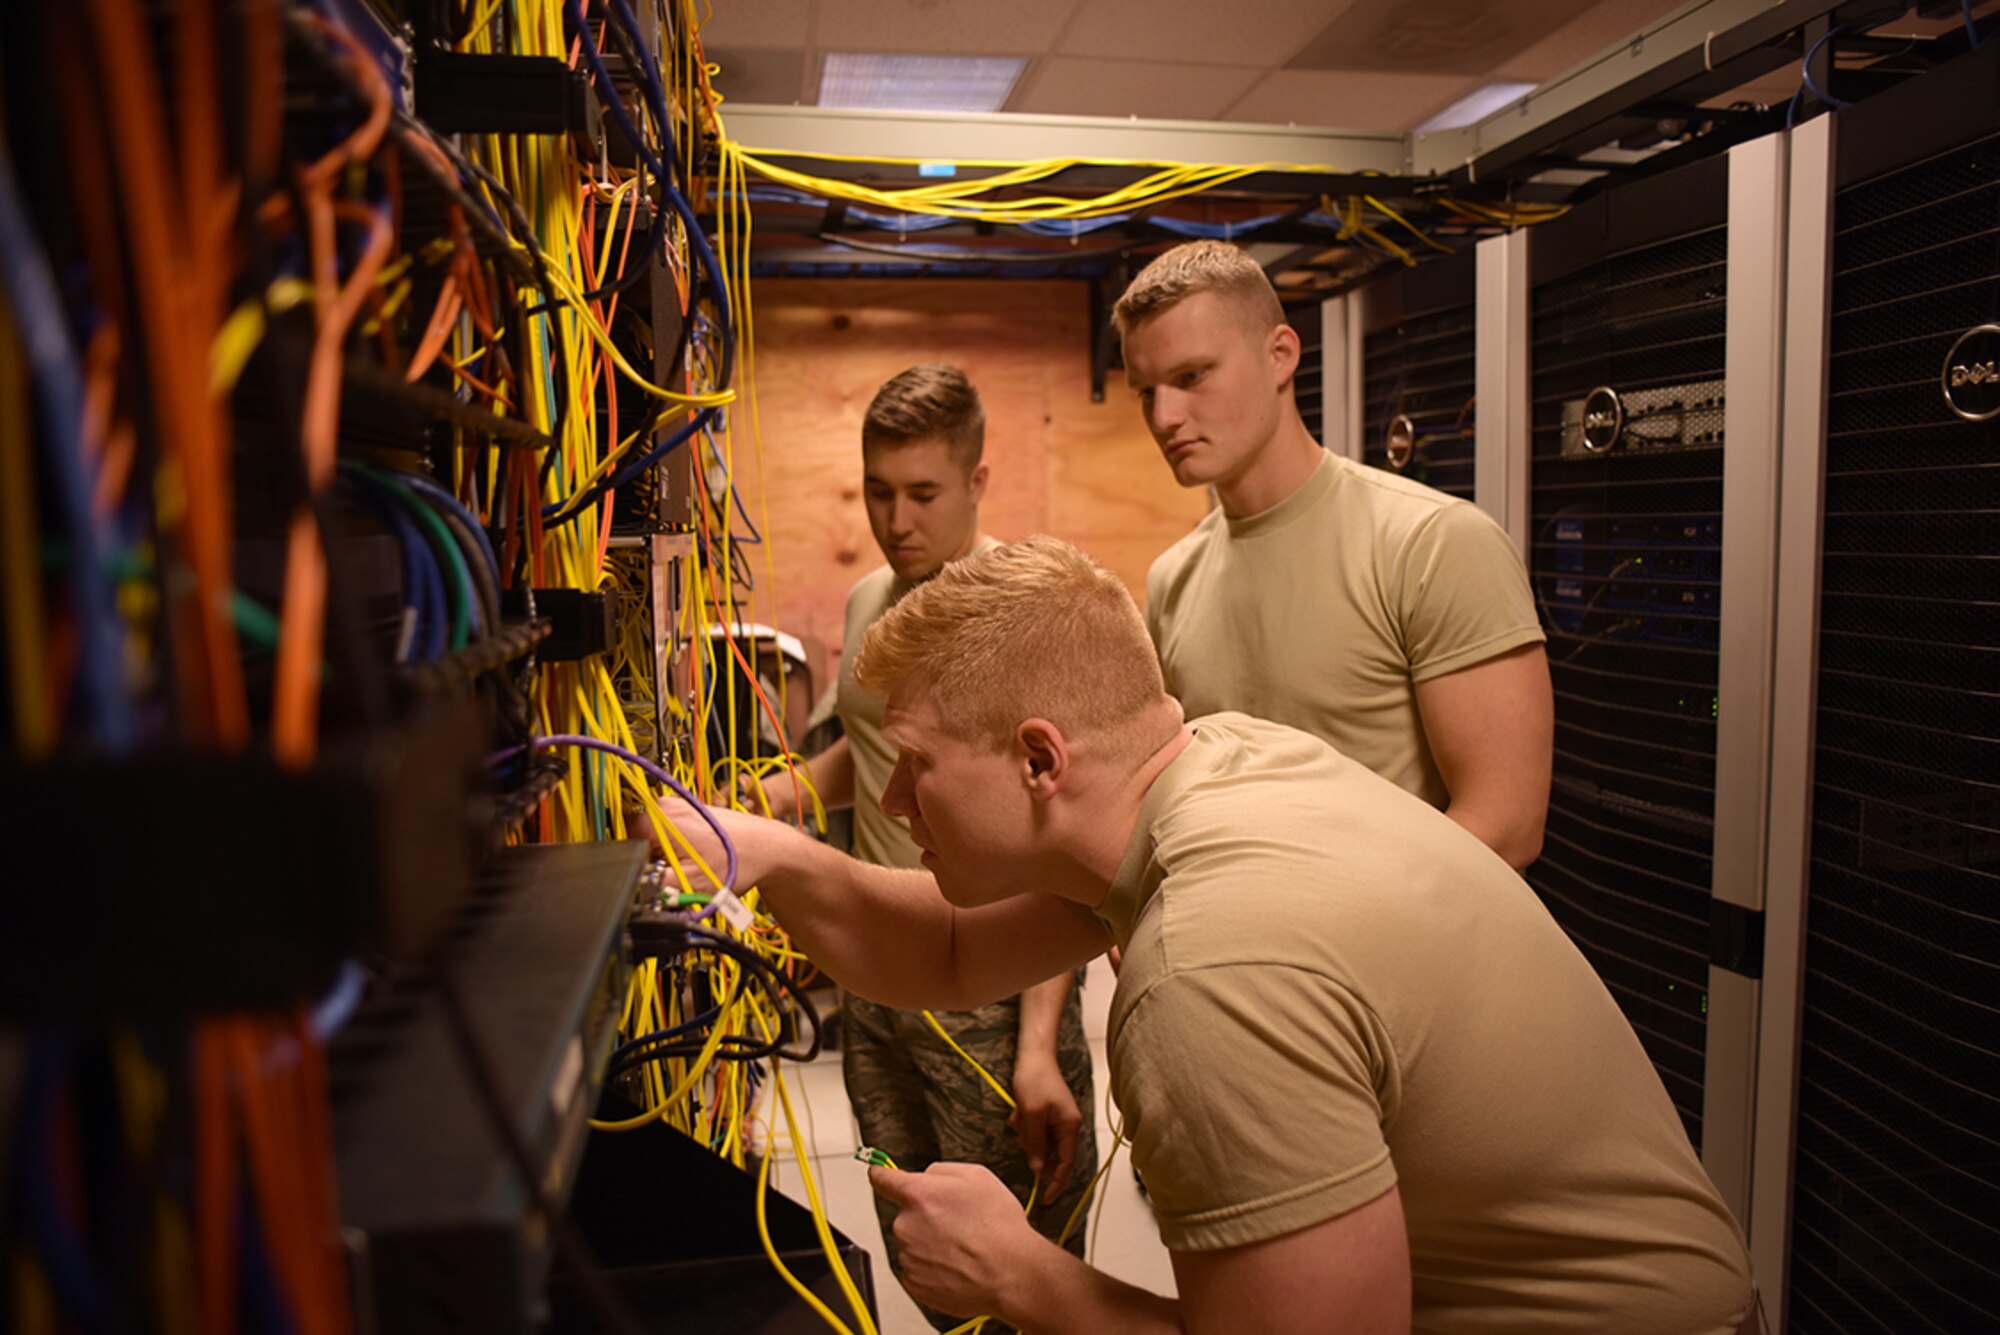 Ohio Air National Guard Airman First Class Justin Mauri, left, Senior Airman Ryan Schuett, center, and Airman First Class Joseph Blust, 178th Communication Squadron, manage fiber optic cables June 7, 2016, at Alpena Combat Readiness Training Center, Alpena Michigan.  Mauri, Schuett, and Blust managed the cables as part of a local base area network modernization project during the 178th wing annual training. (Ohio Air National Guard Photo by Master Sgt. Seth Skidmore)